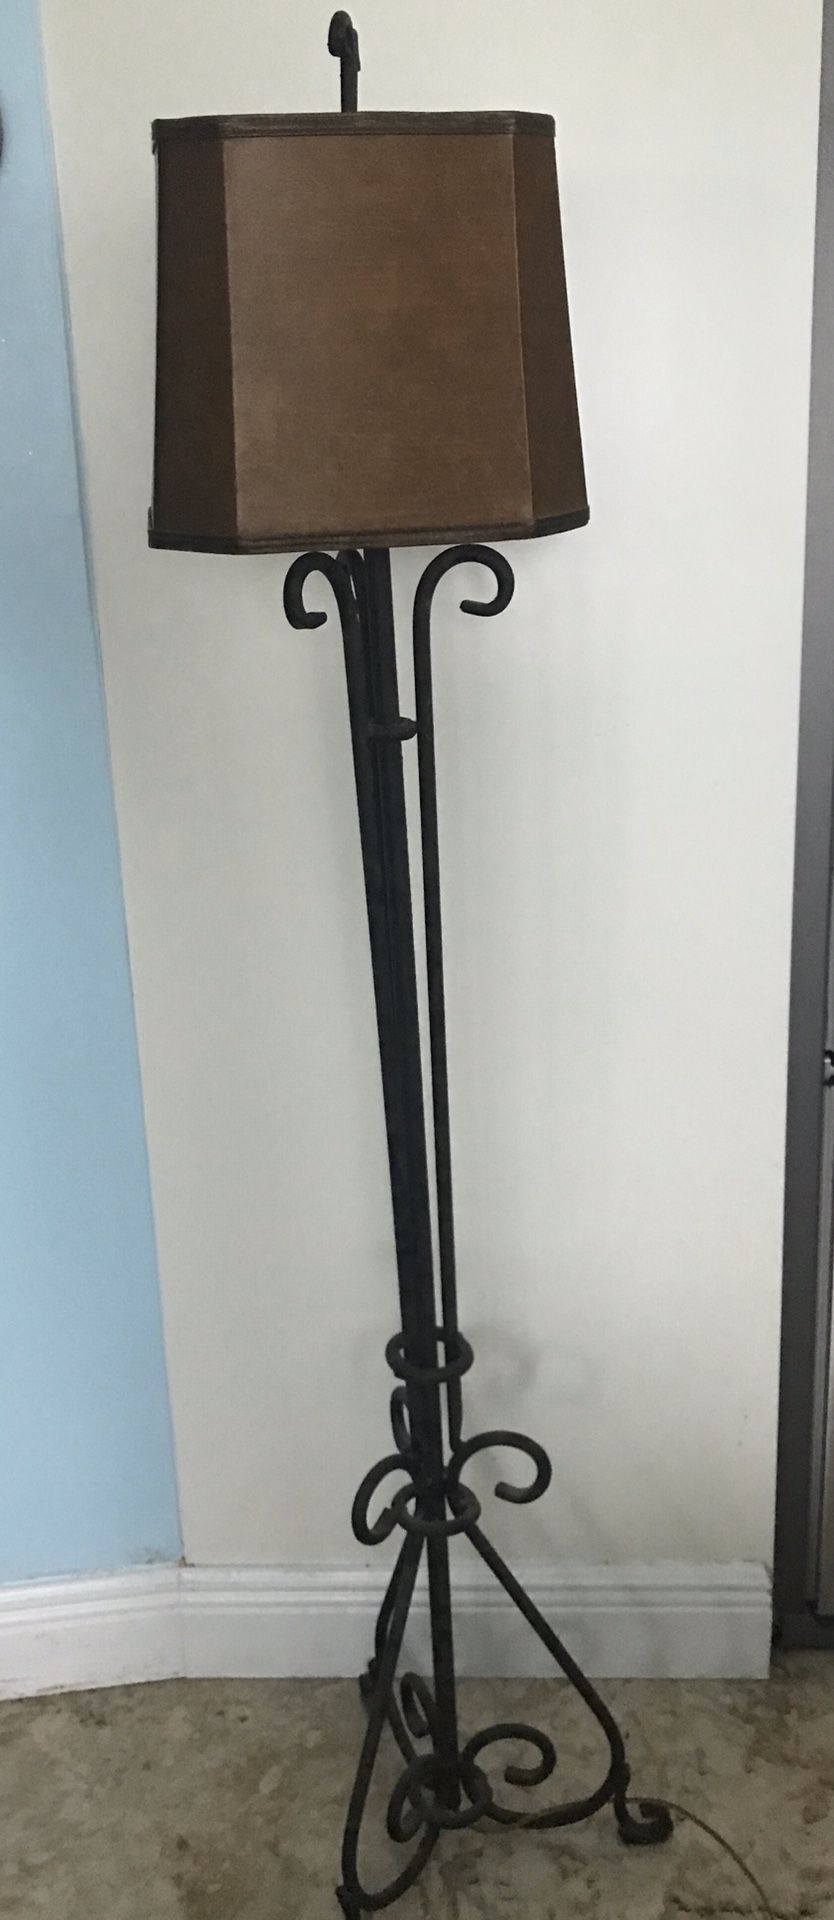 Wrought iron lamp with brown shade